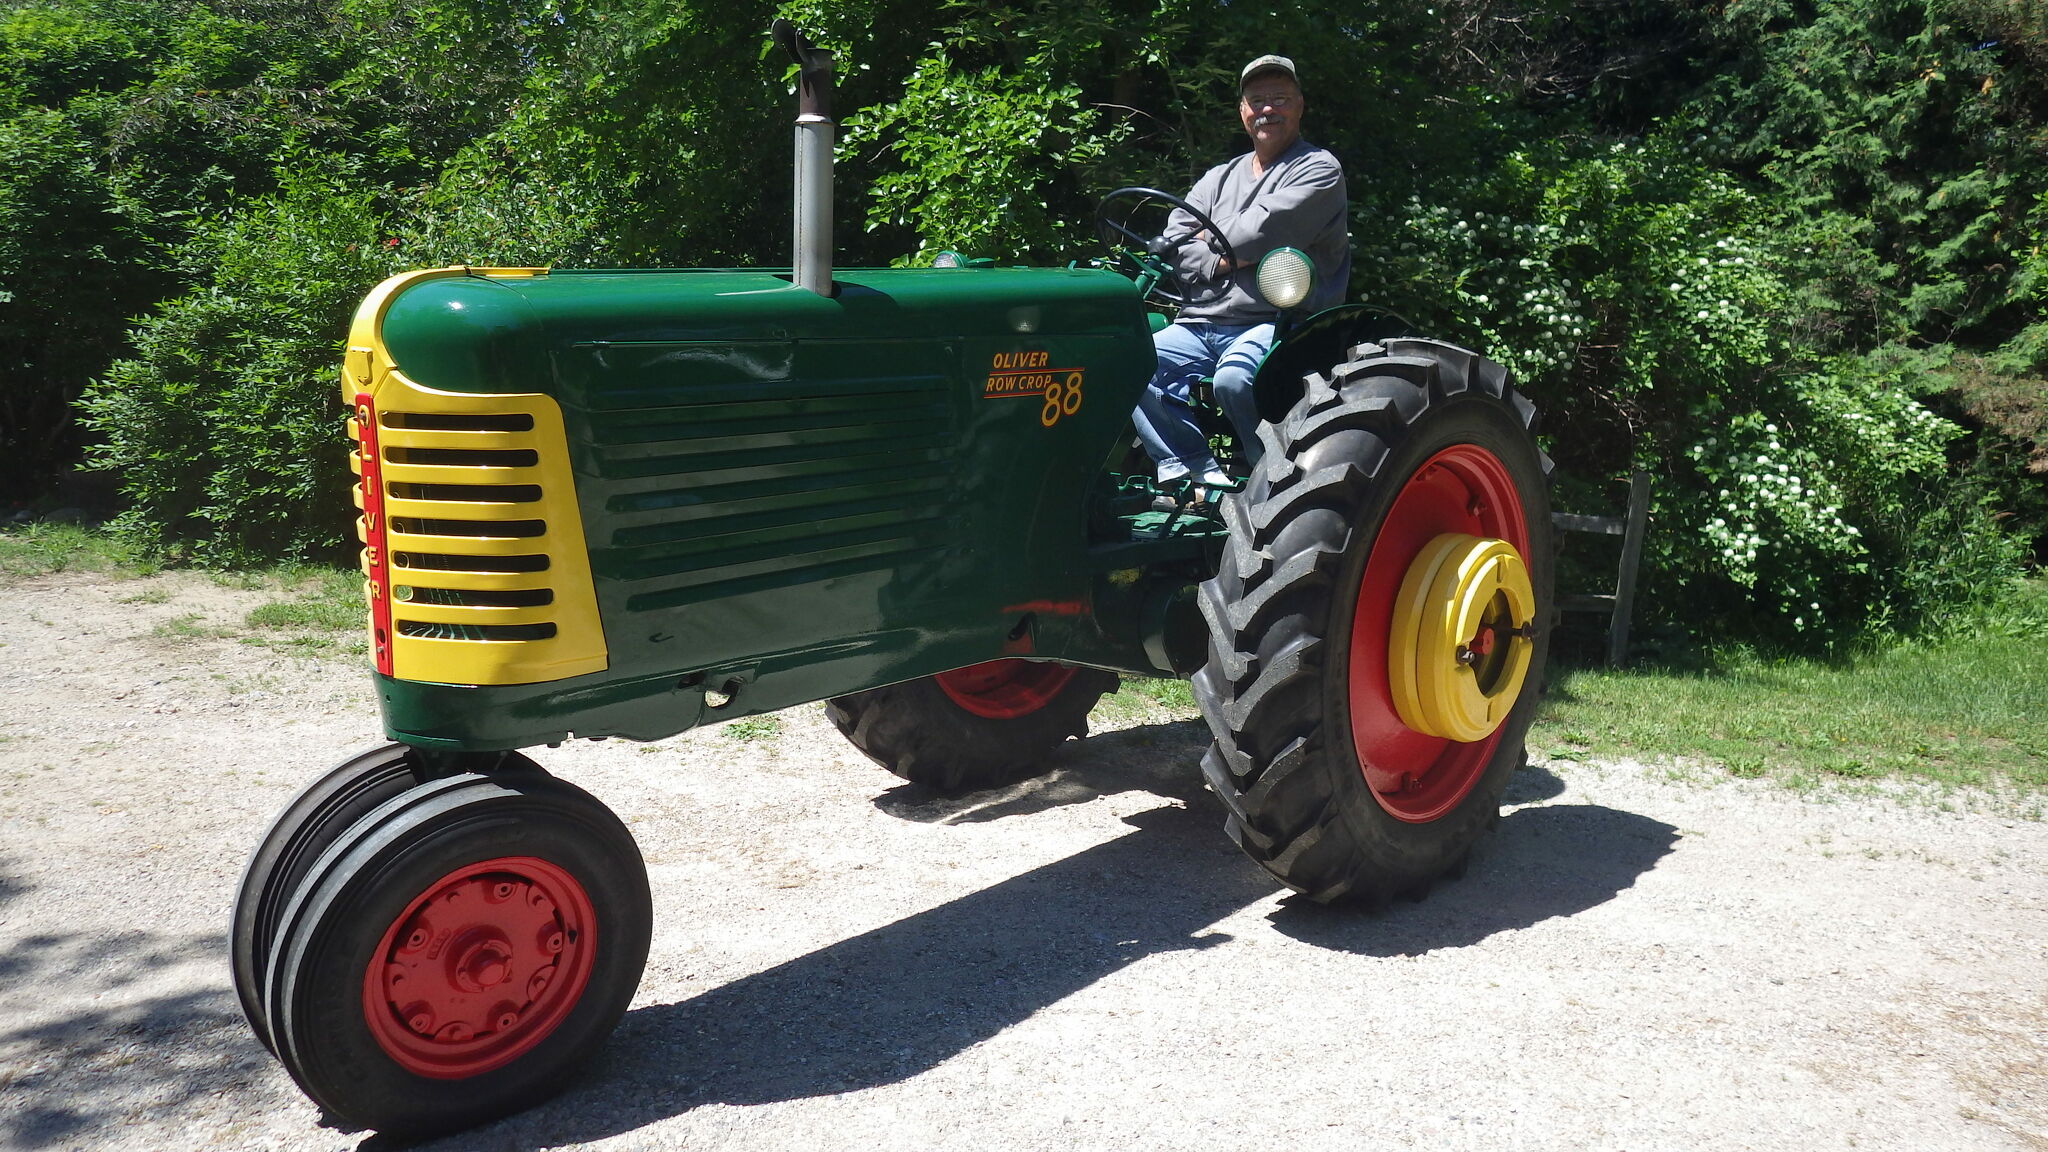 Classic Tractor Fever - A nicely restored Oliver Super 77 diesel